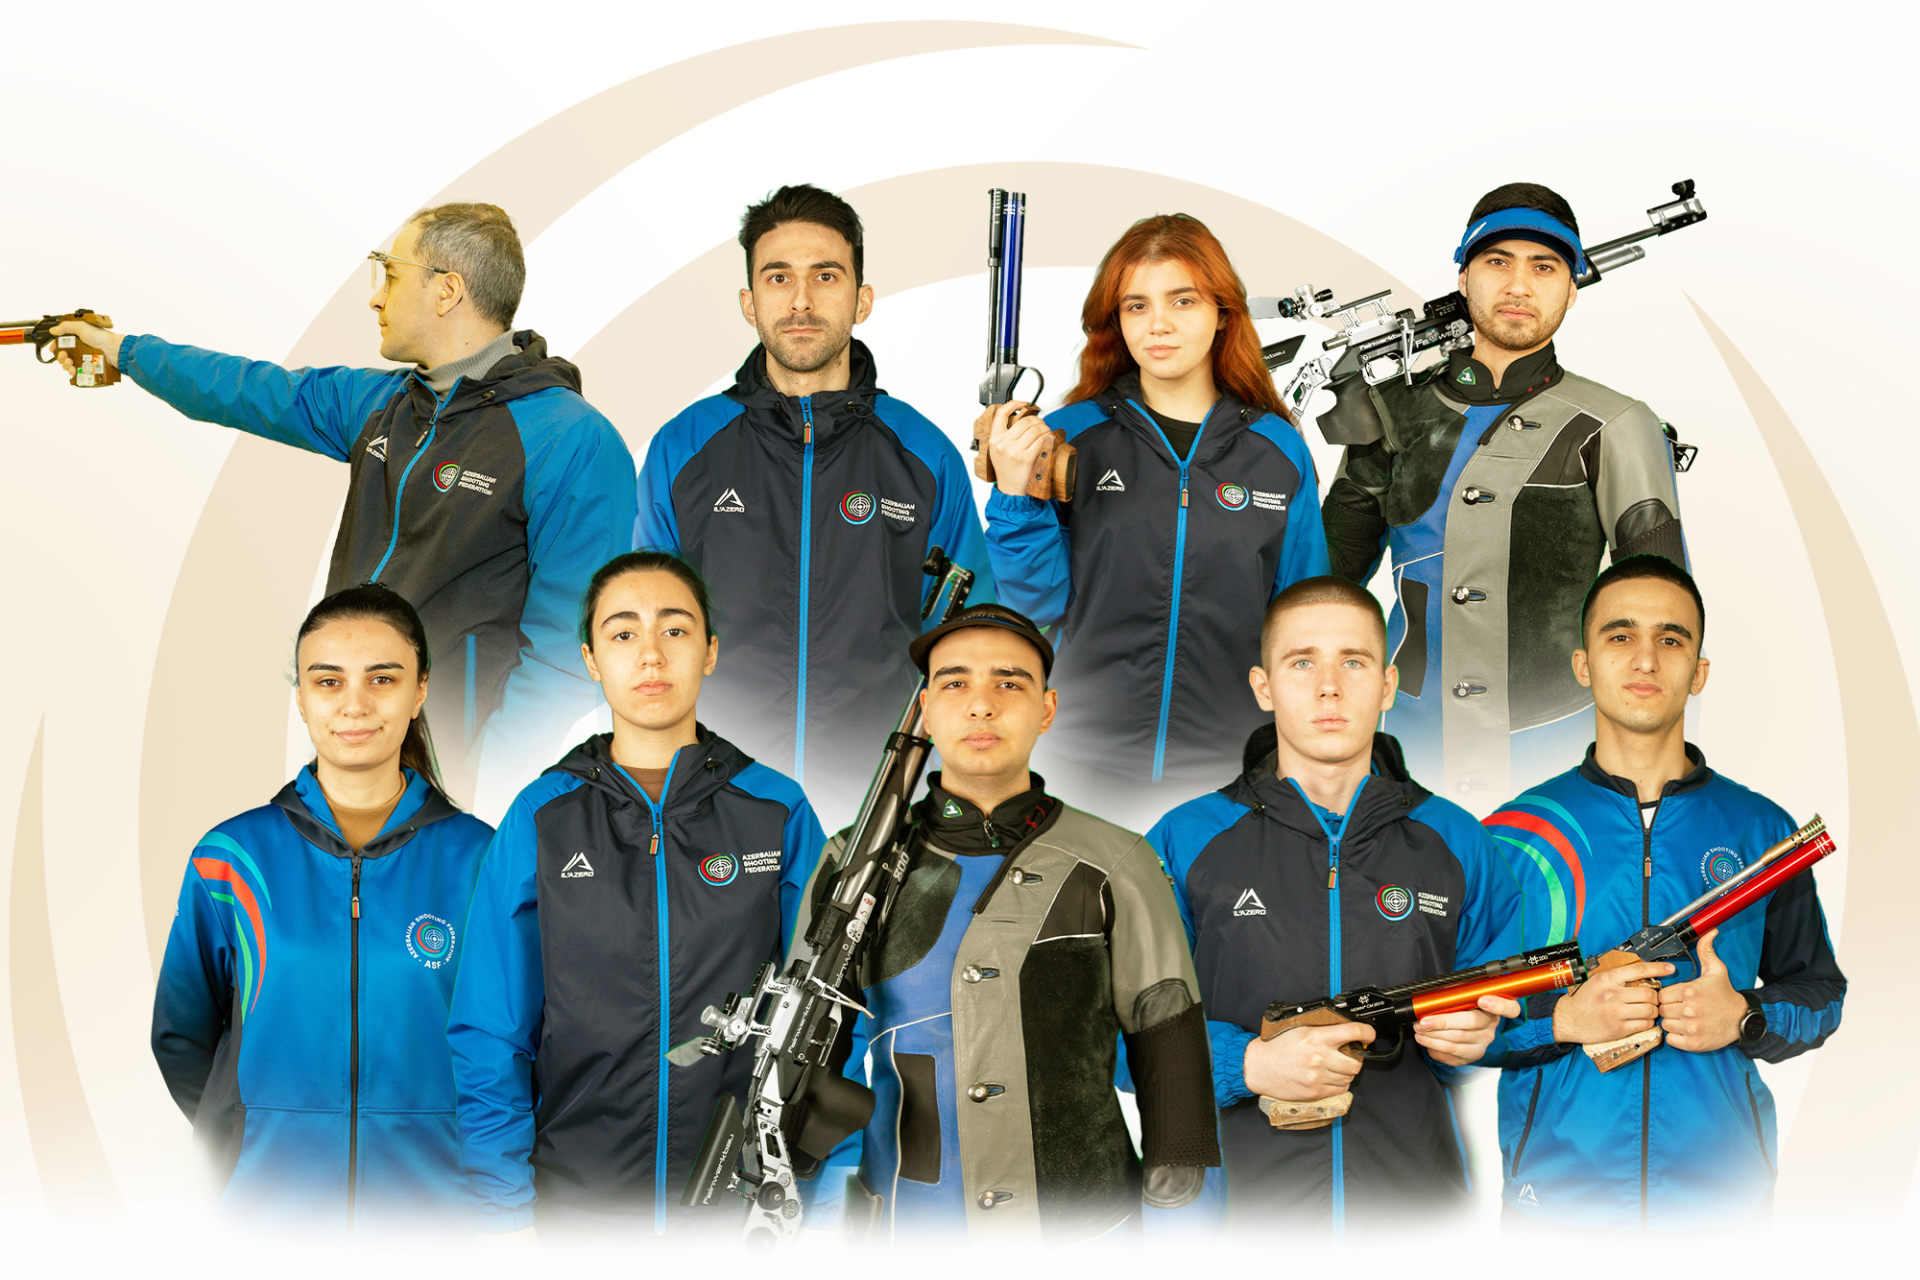 Azerbaijani national team is going to Munich with 10 snipers